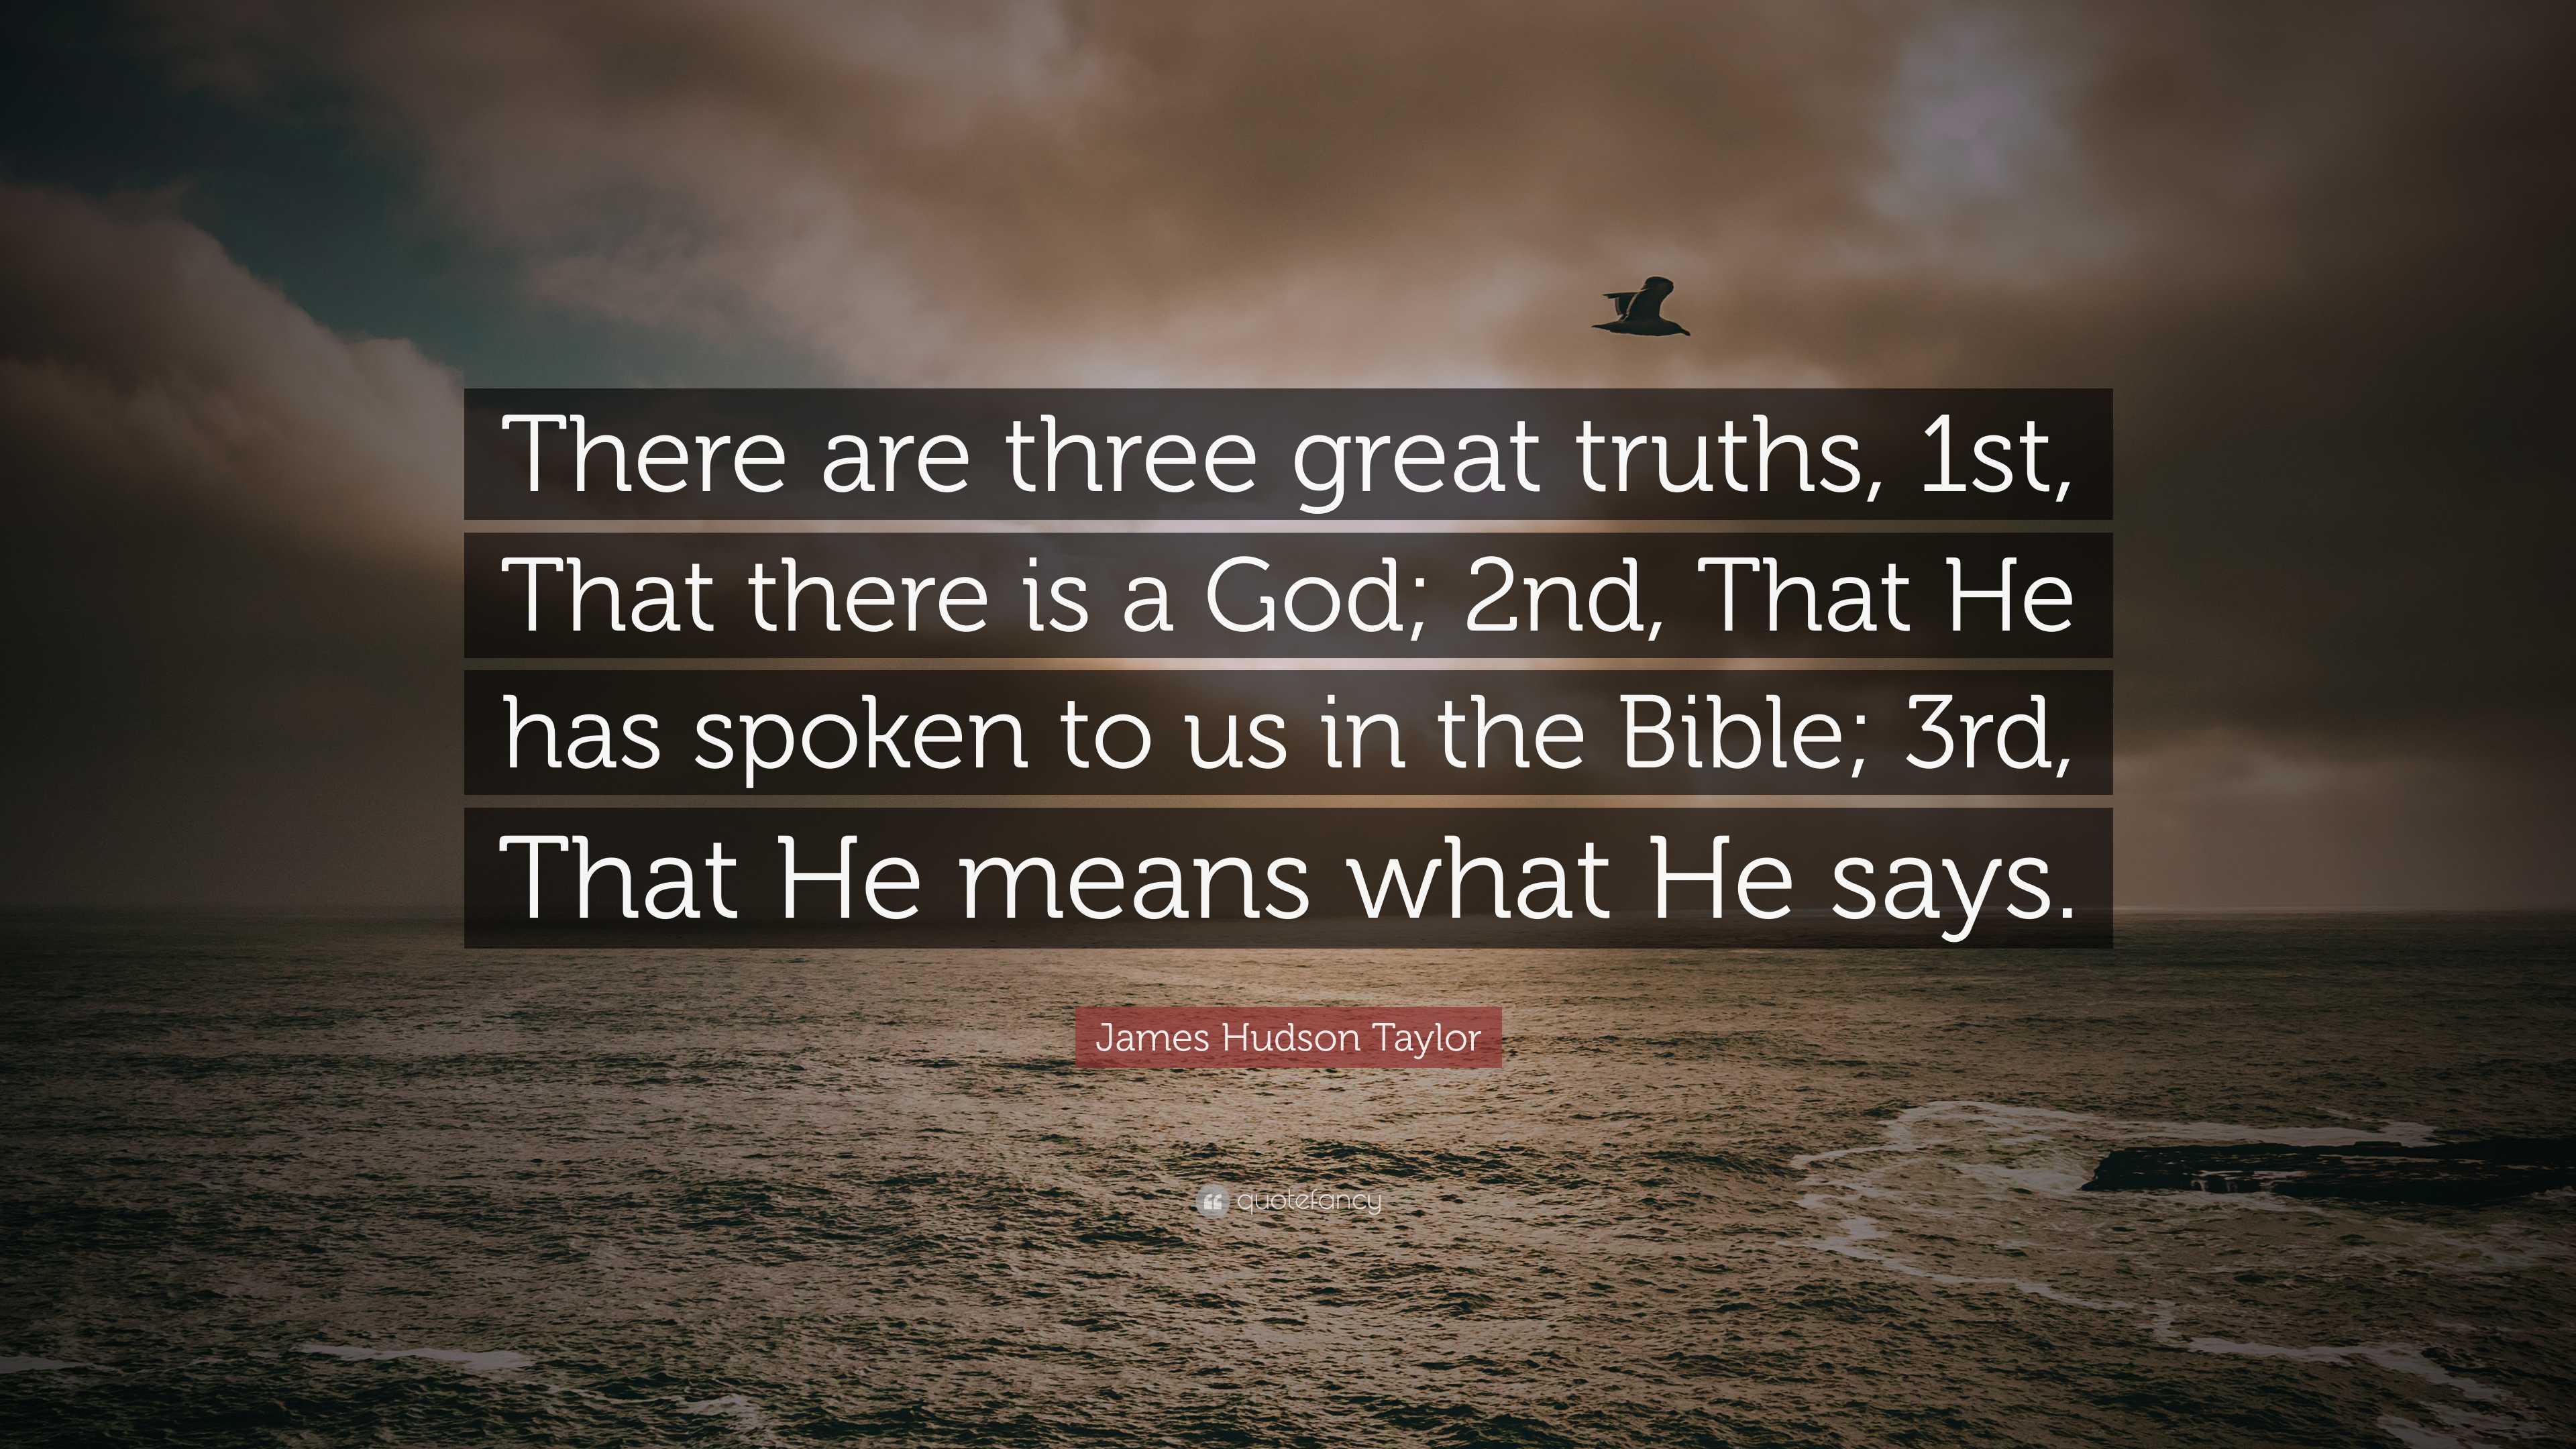 James Hudson Taylor Quote: “There are three great truths, 1st, That ...